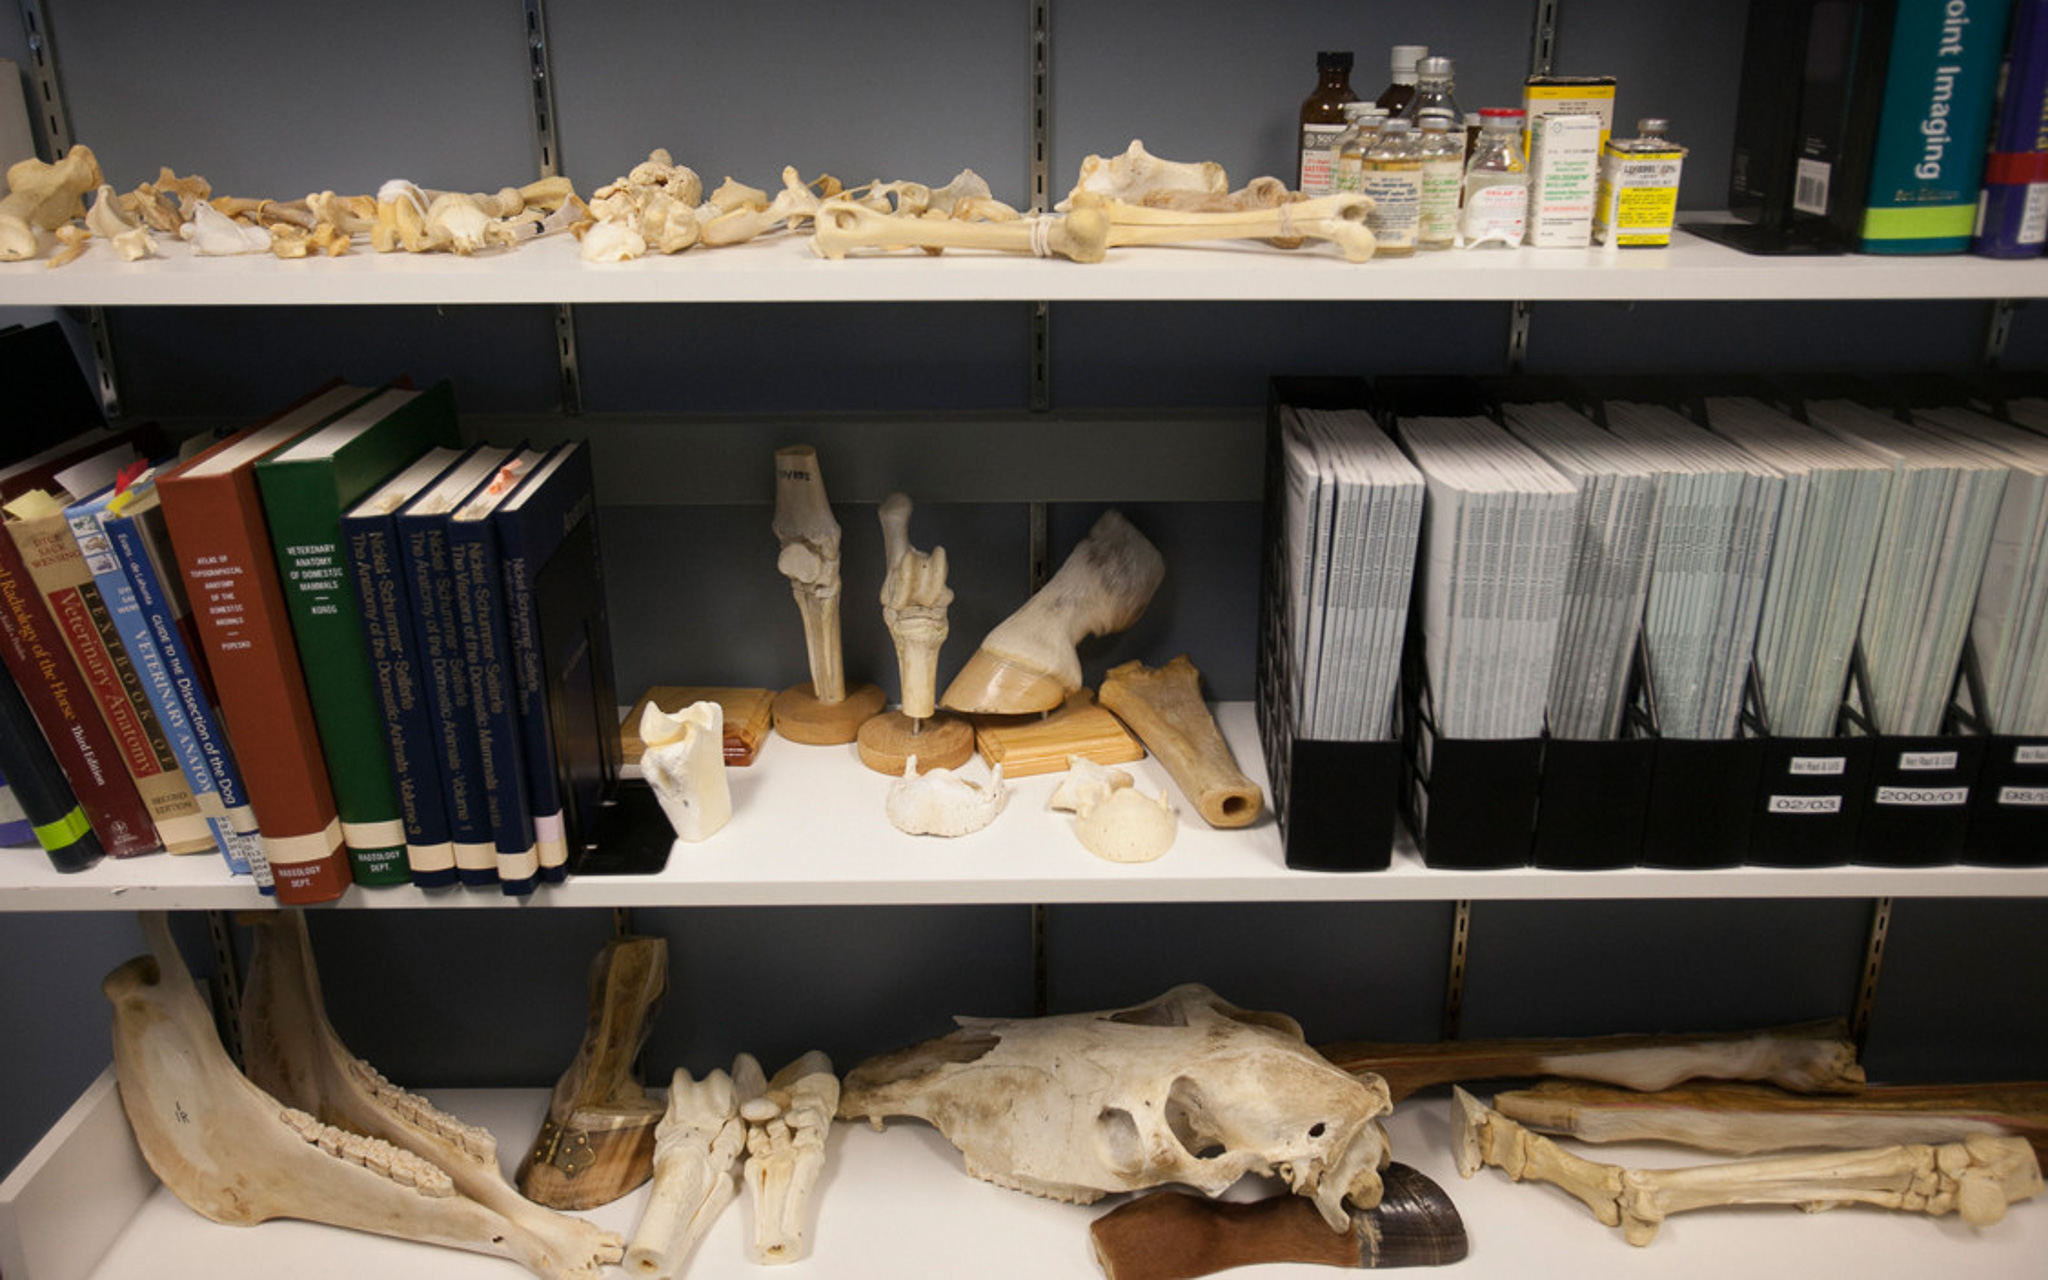 Learning materials shelved in the lab